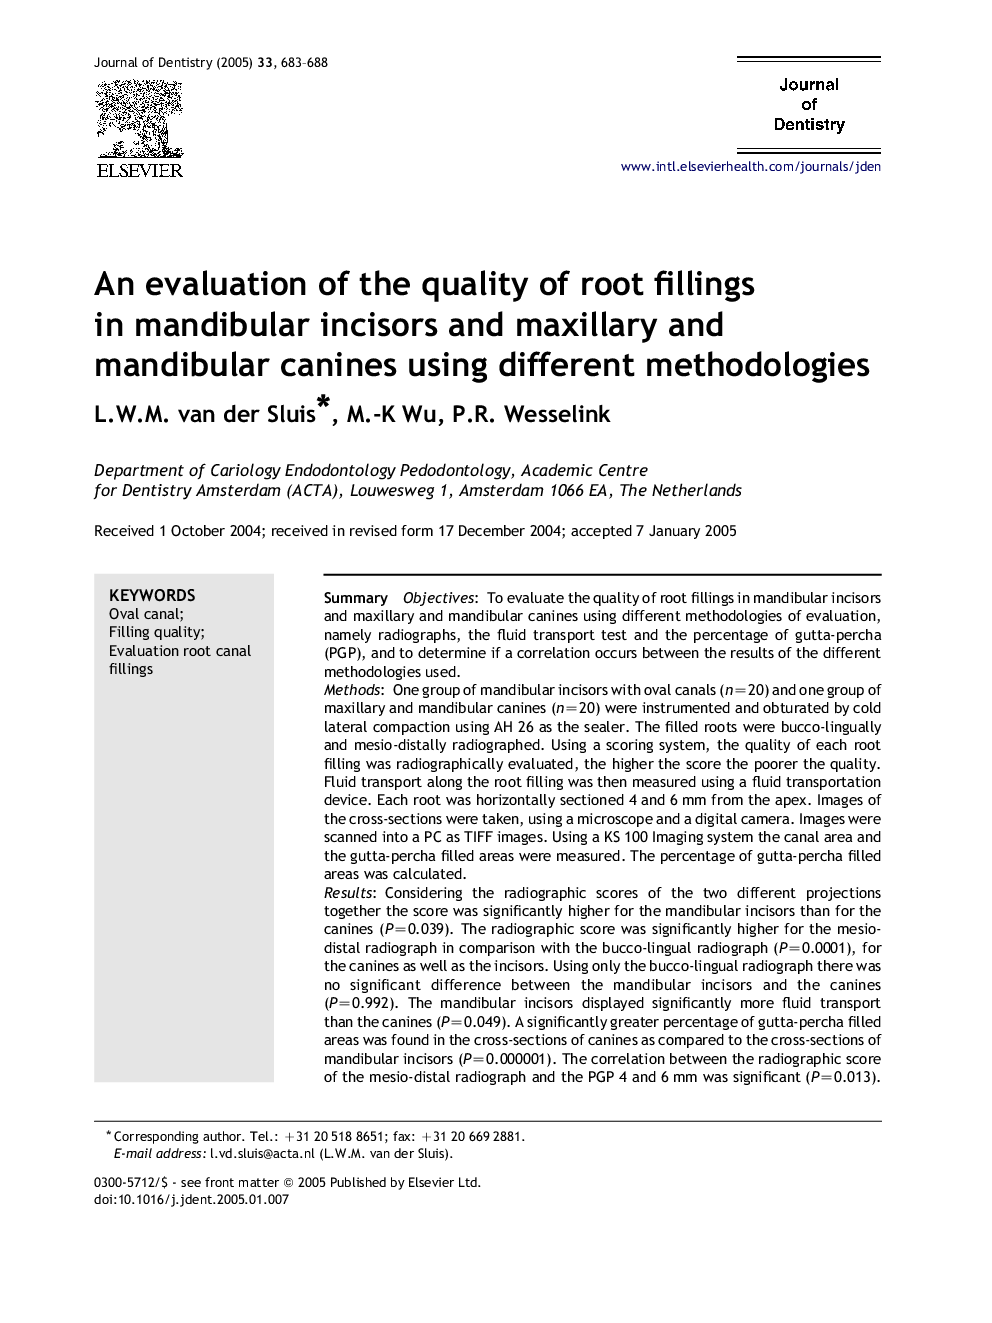 An evaluation of the quality of root fillings in mandibular incisors and maxillary and mandibular canines using different methodologies